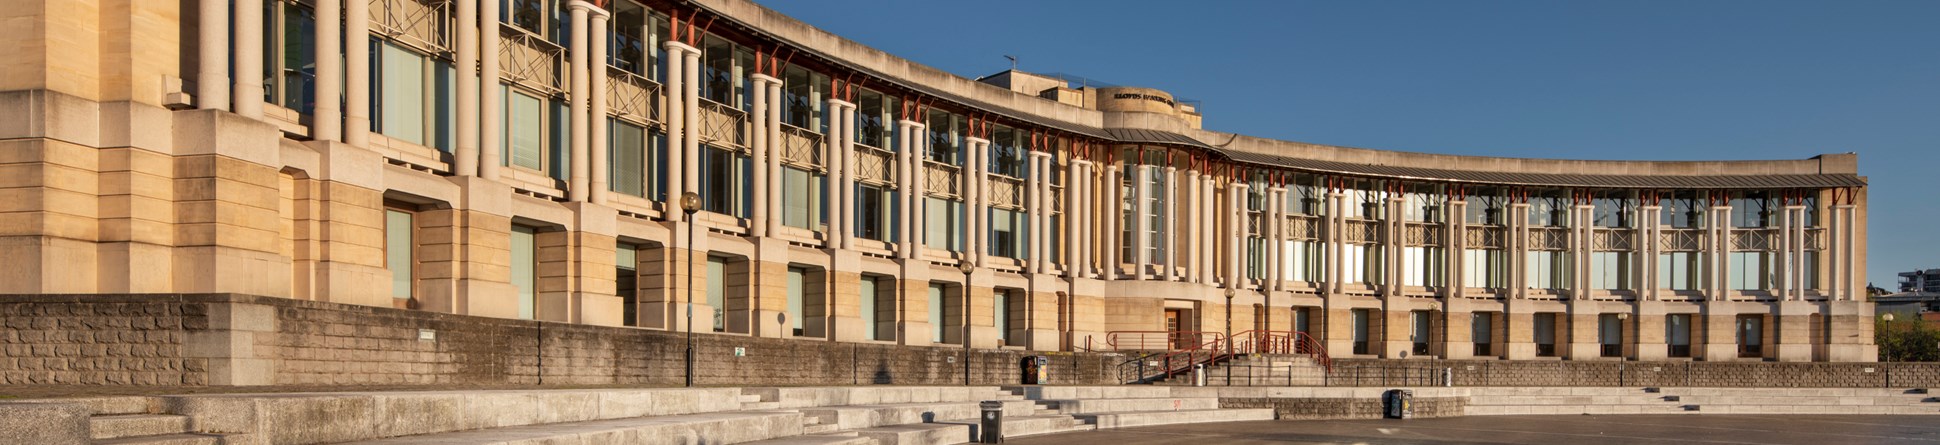 A grand, modern building with a curved frontage and colonnade overlooks a paved public space